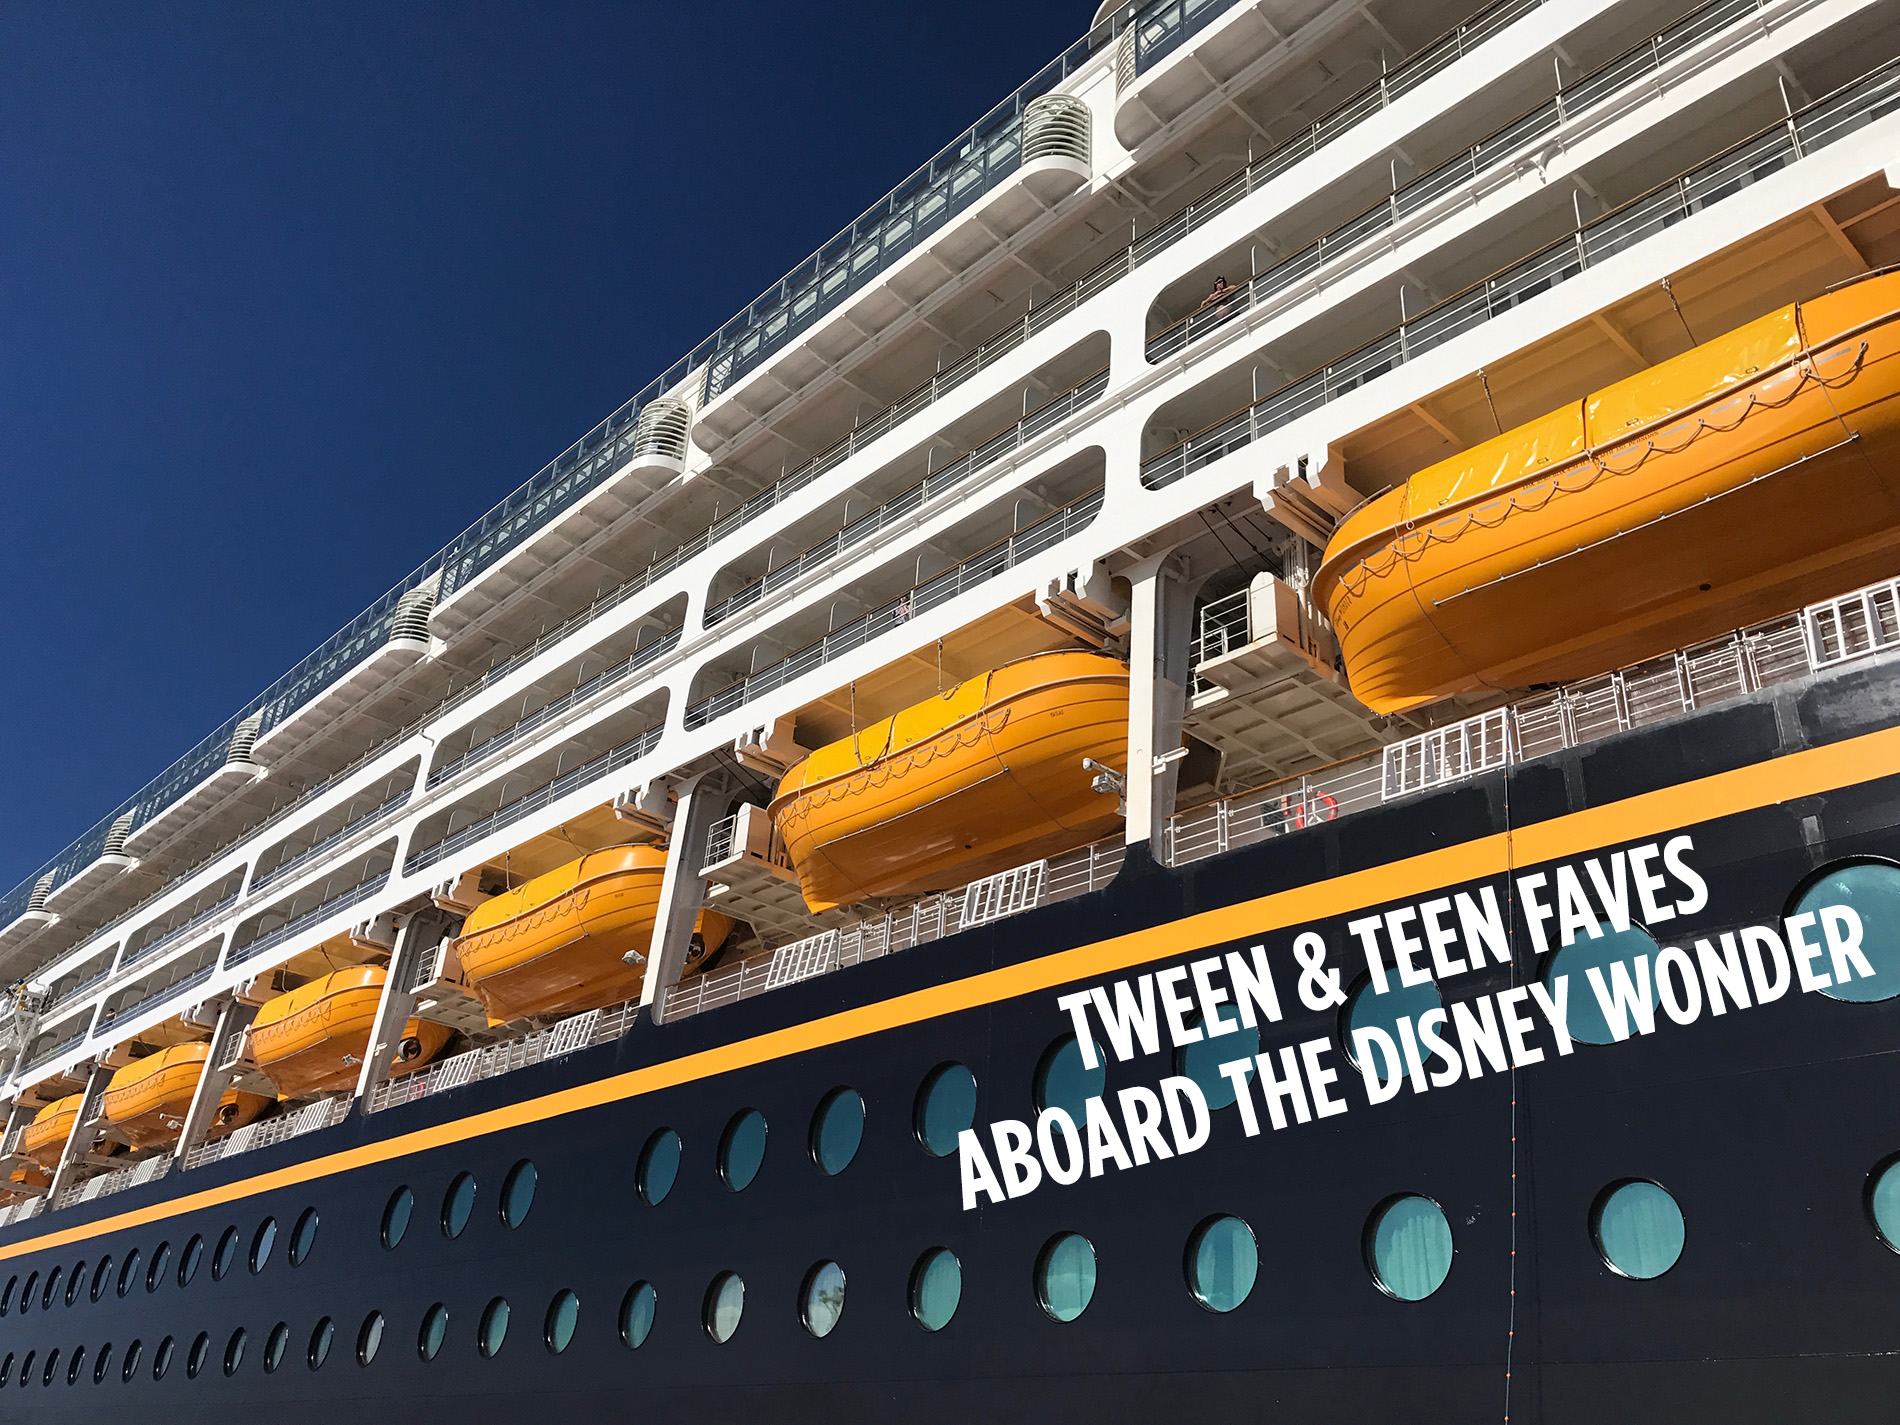 What teens and tweens will love on board the Disney Dream - part of the Disney Cruise Line Fleet